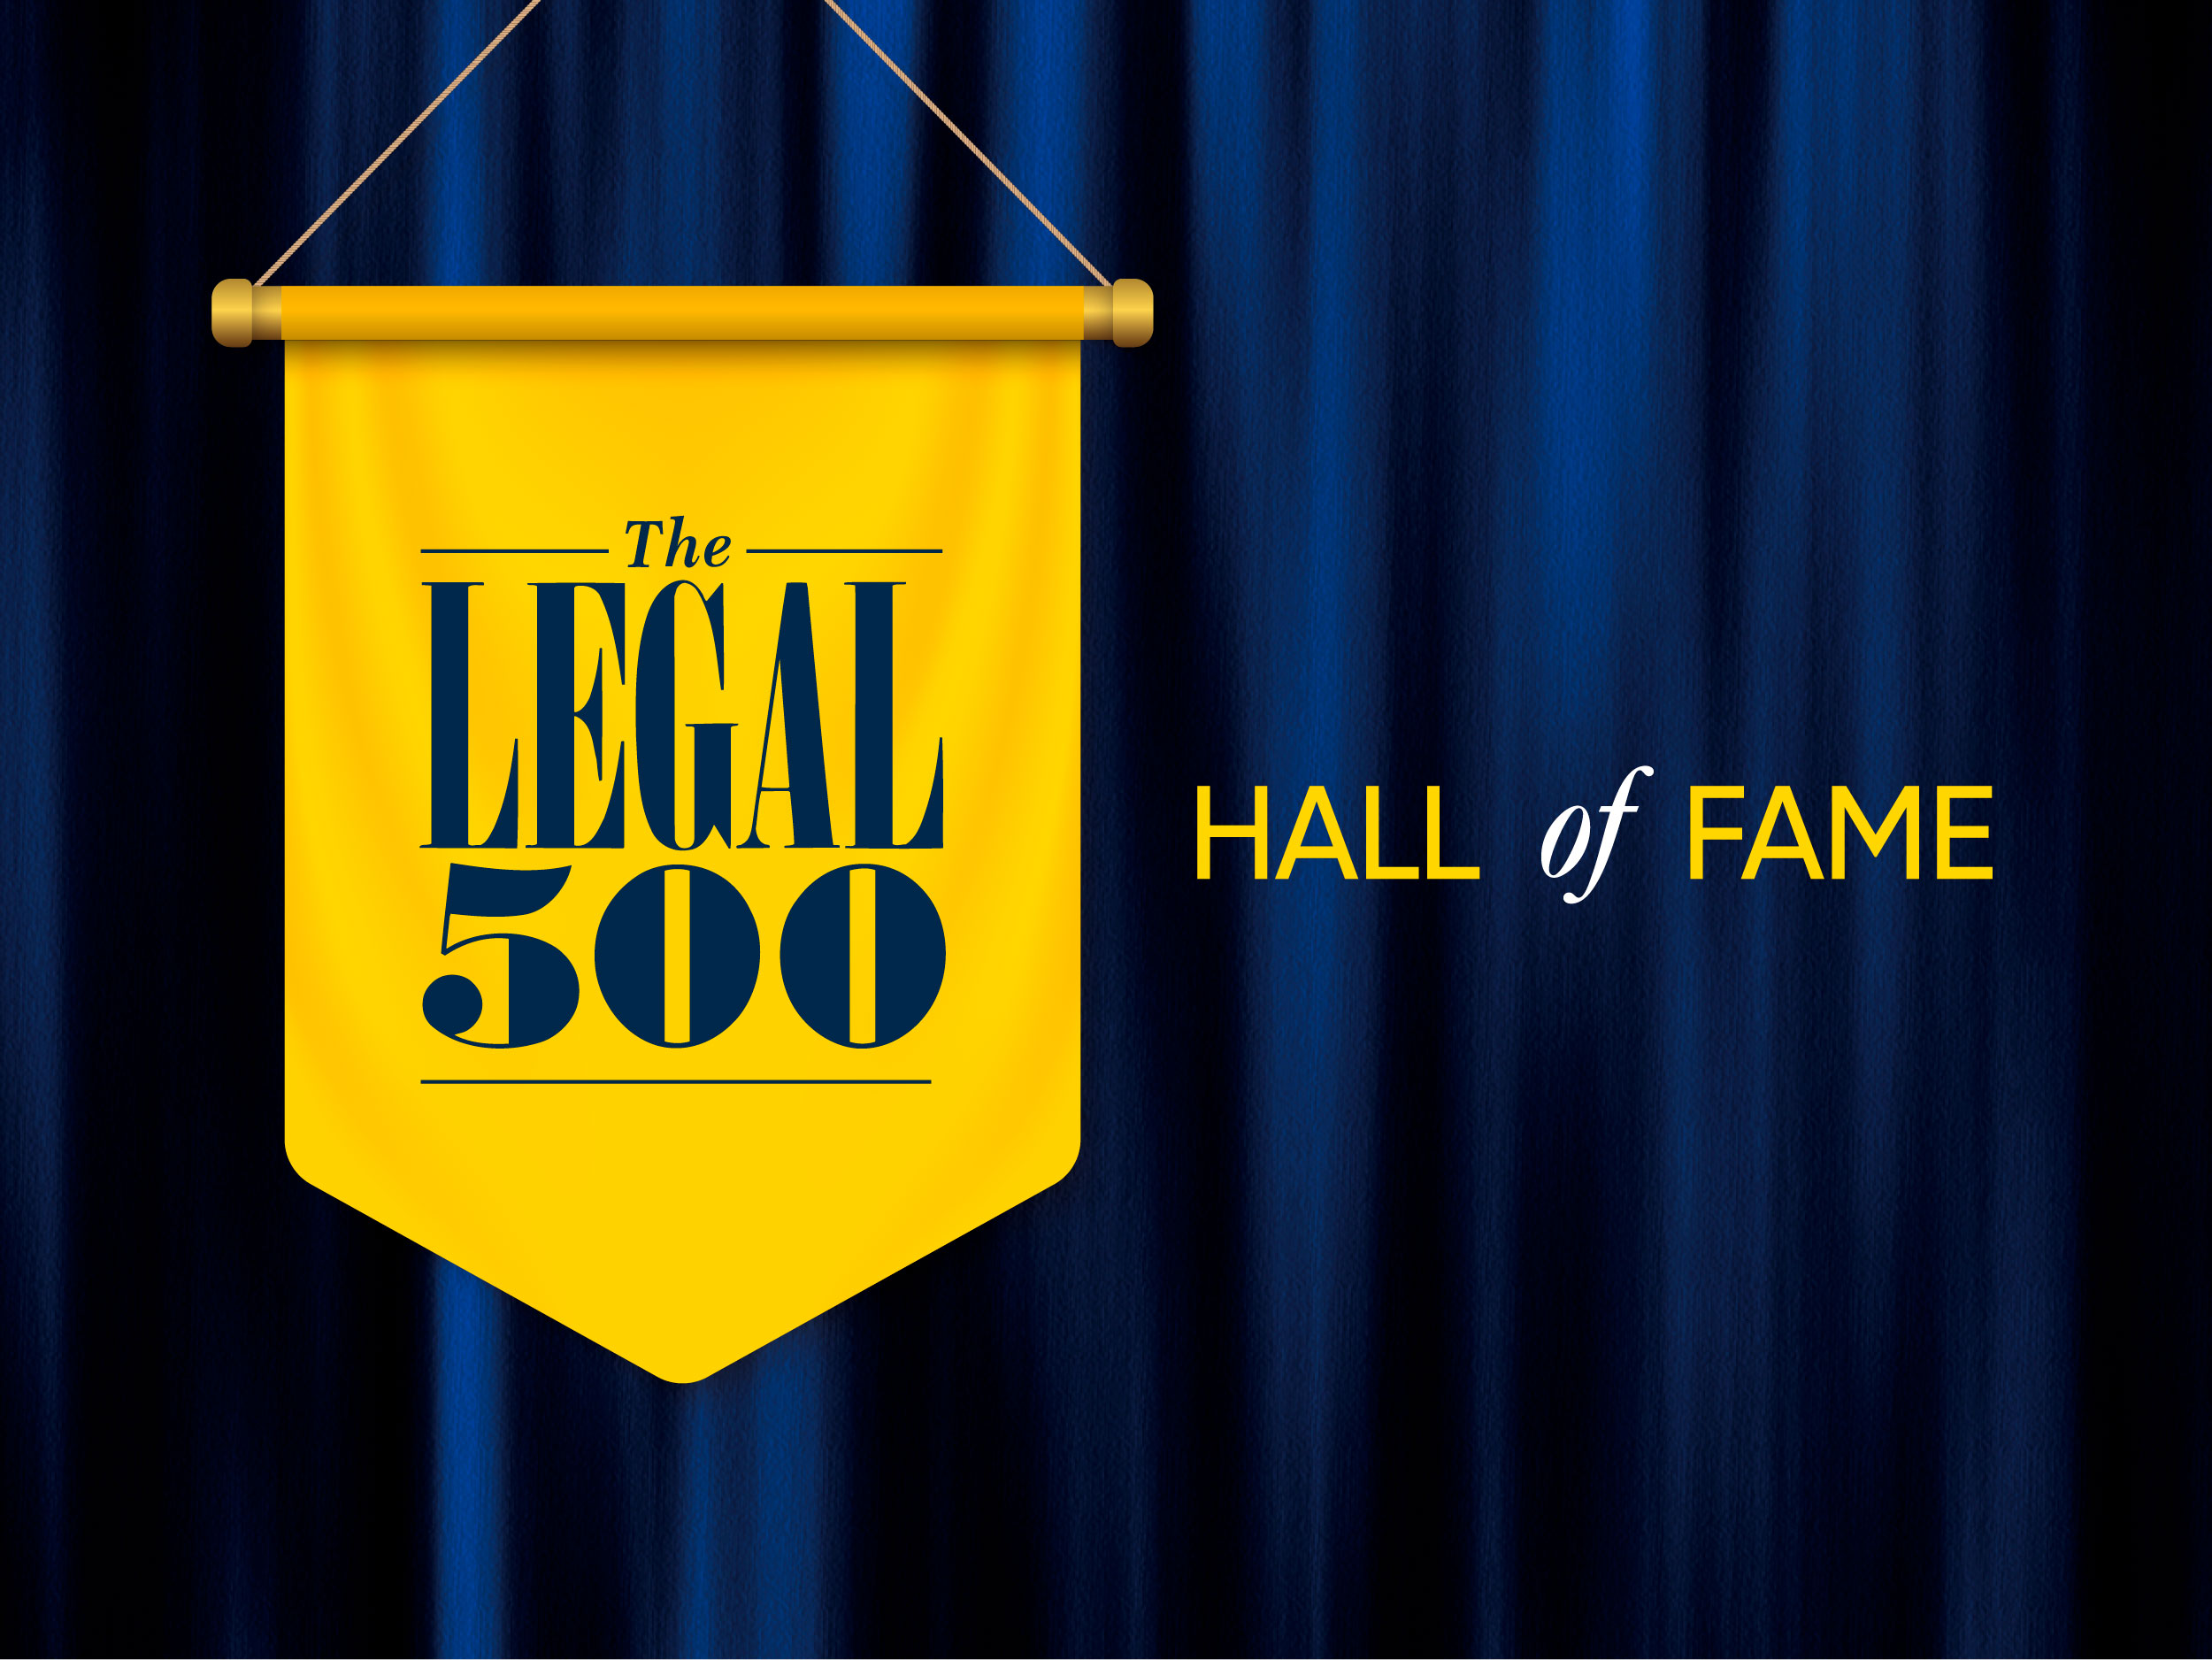 Jefferies Legal 500 Hall of fame 2019